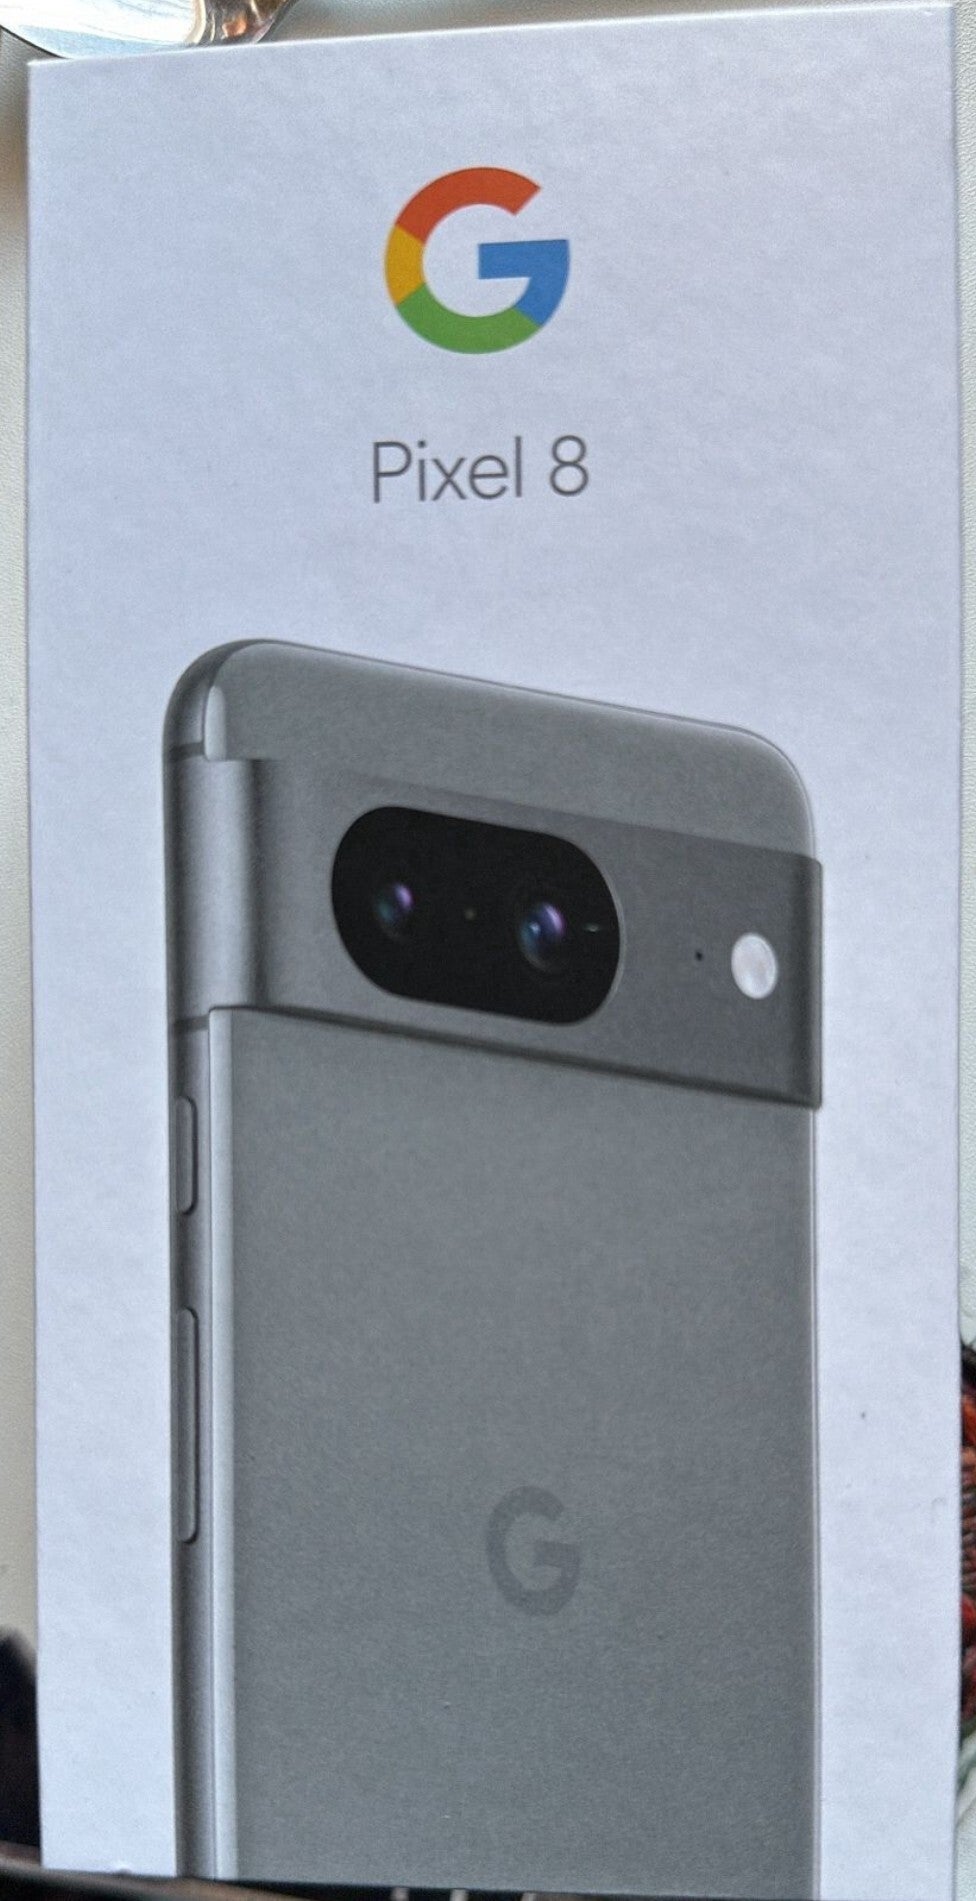 Pixel 8 box front - Google Pixel 8: what key display and storage specs are on the box?